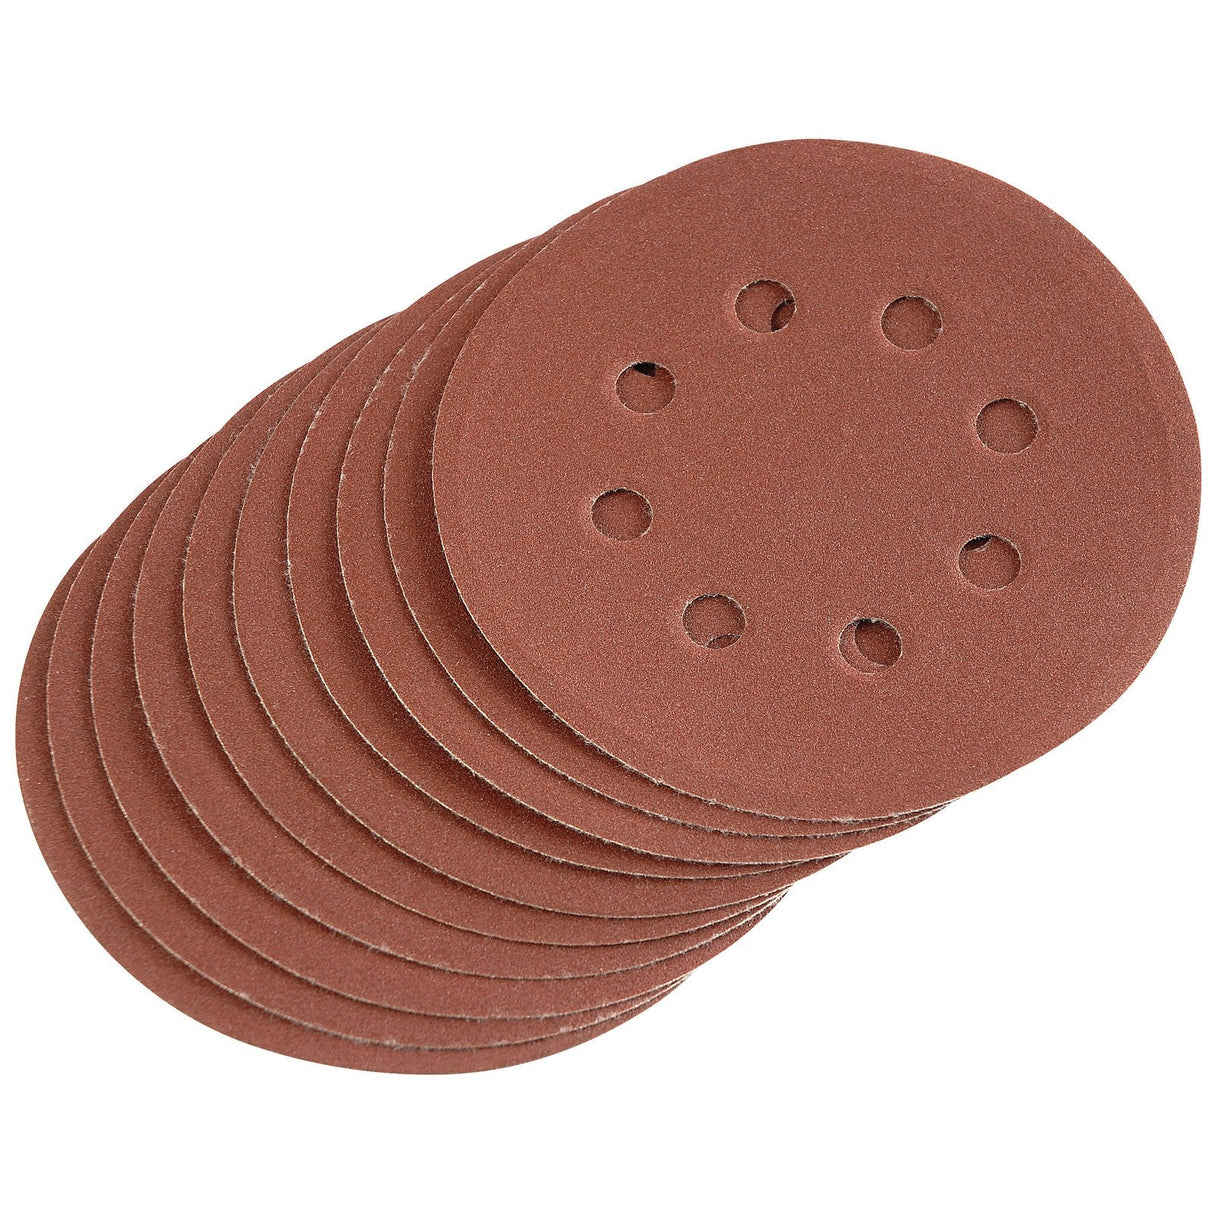 Draper Hook And Loop Sanding Discs, 125mm, 240 Grit (Pack Of 10) - SD5V - Farming Parts